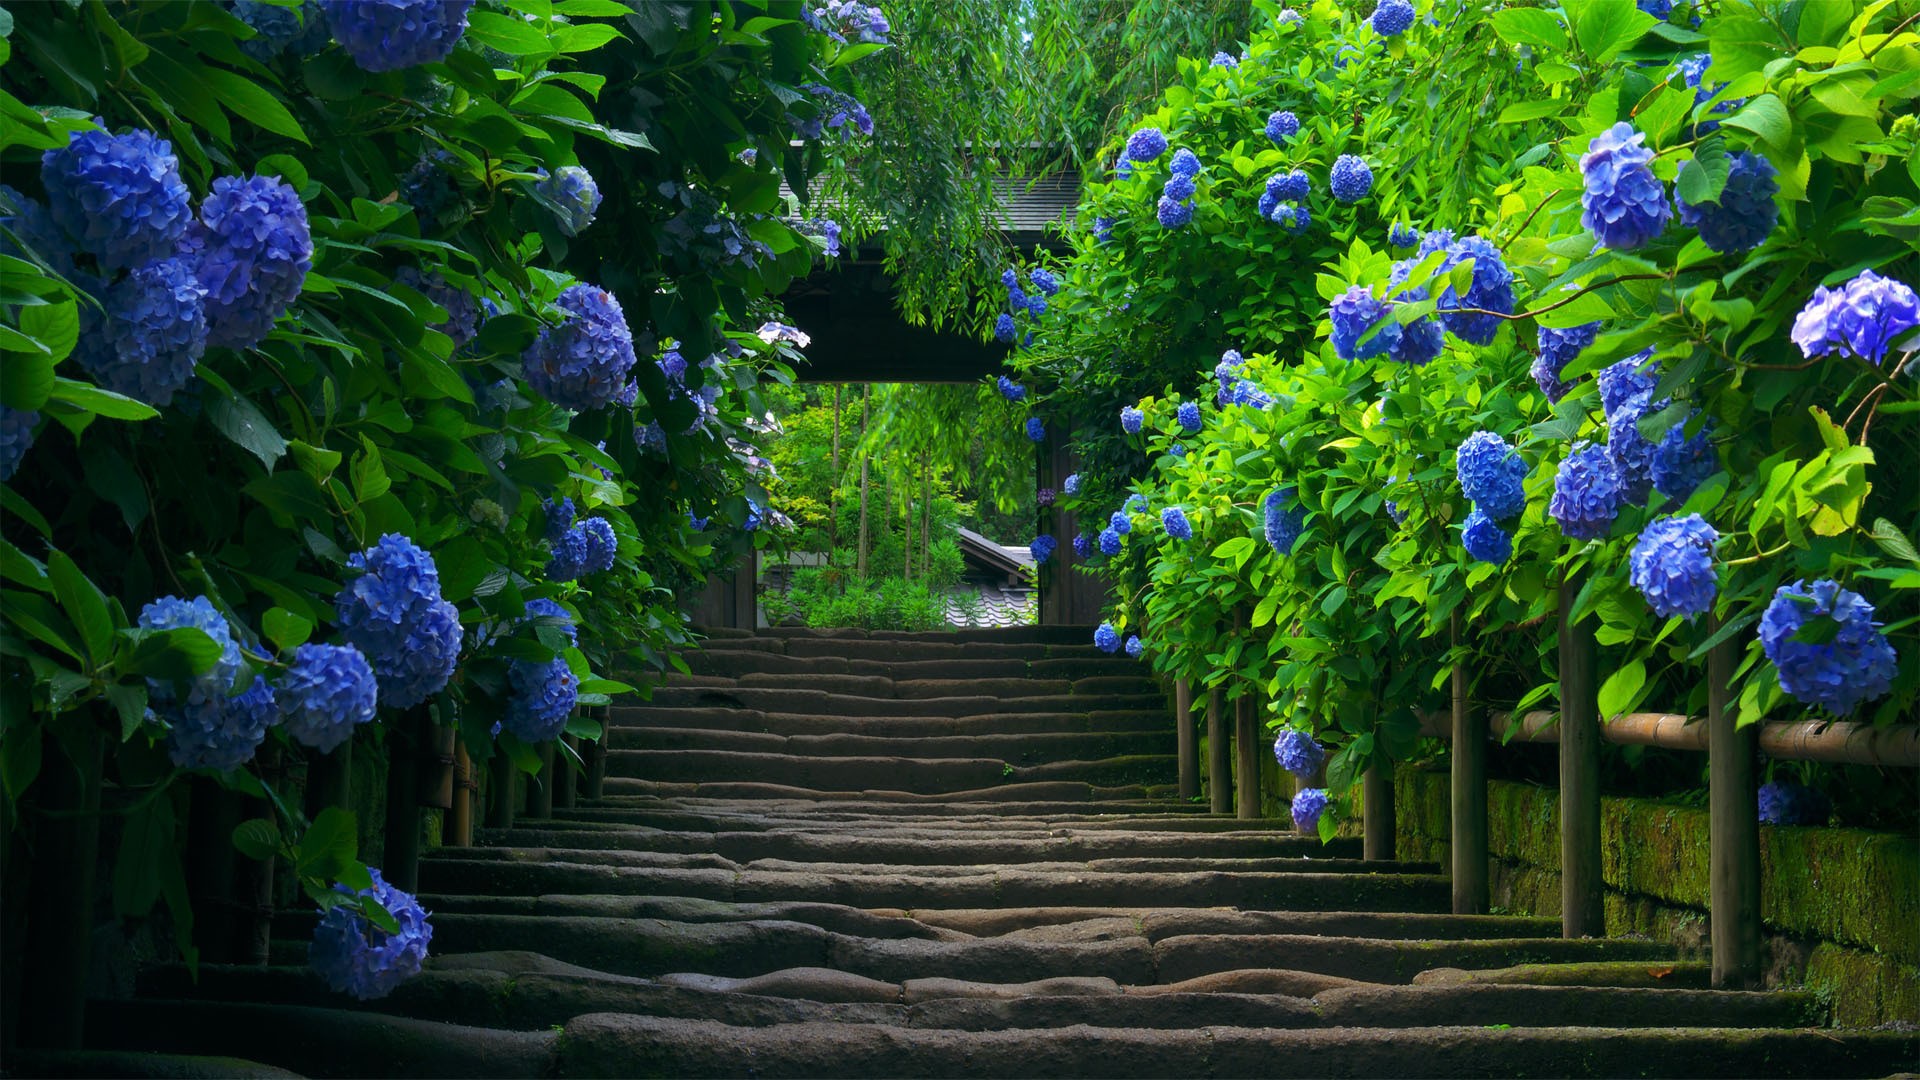 Stairway to a Garden of Nature